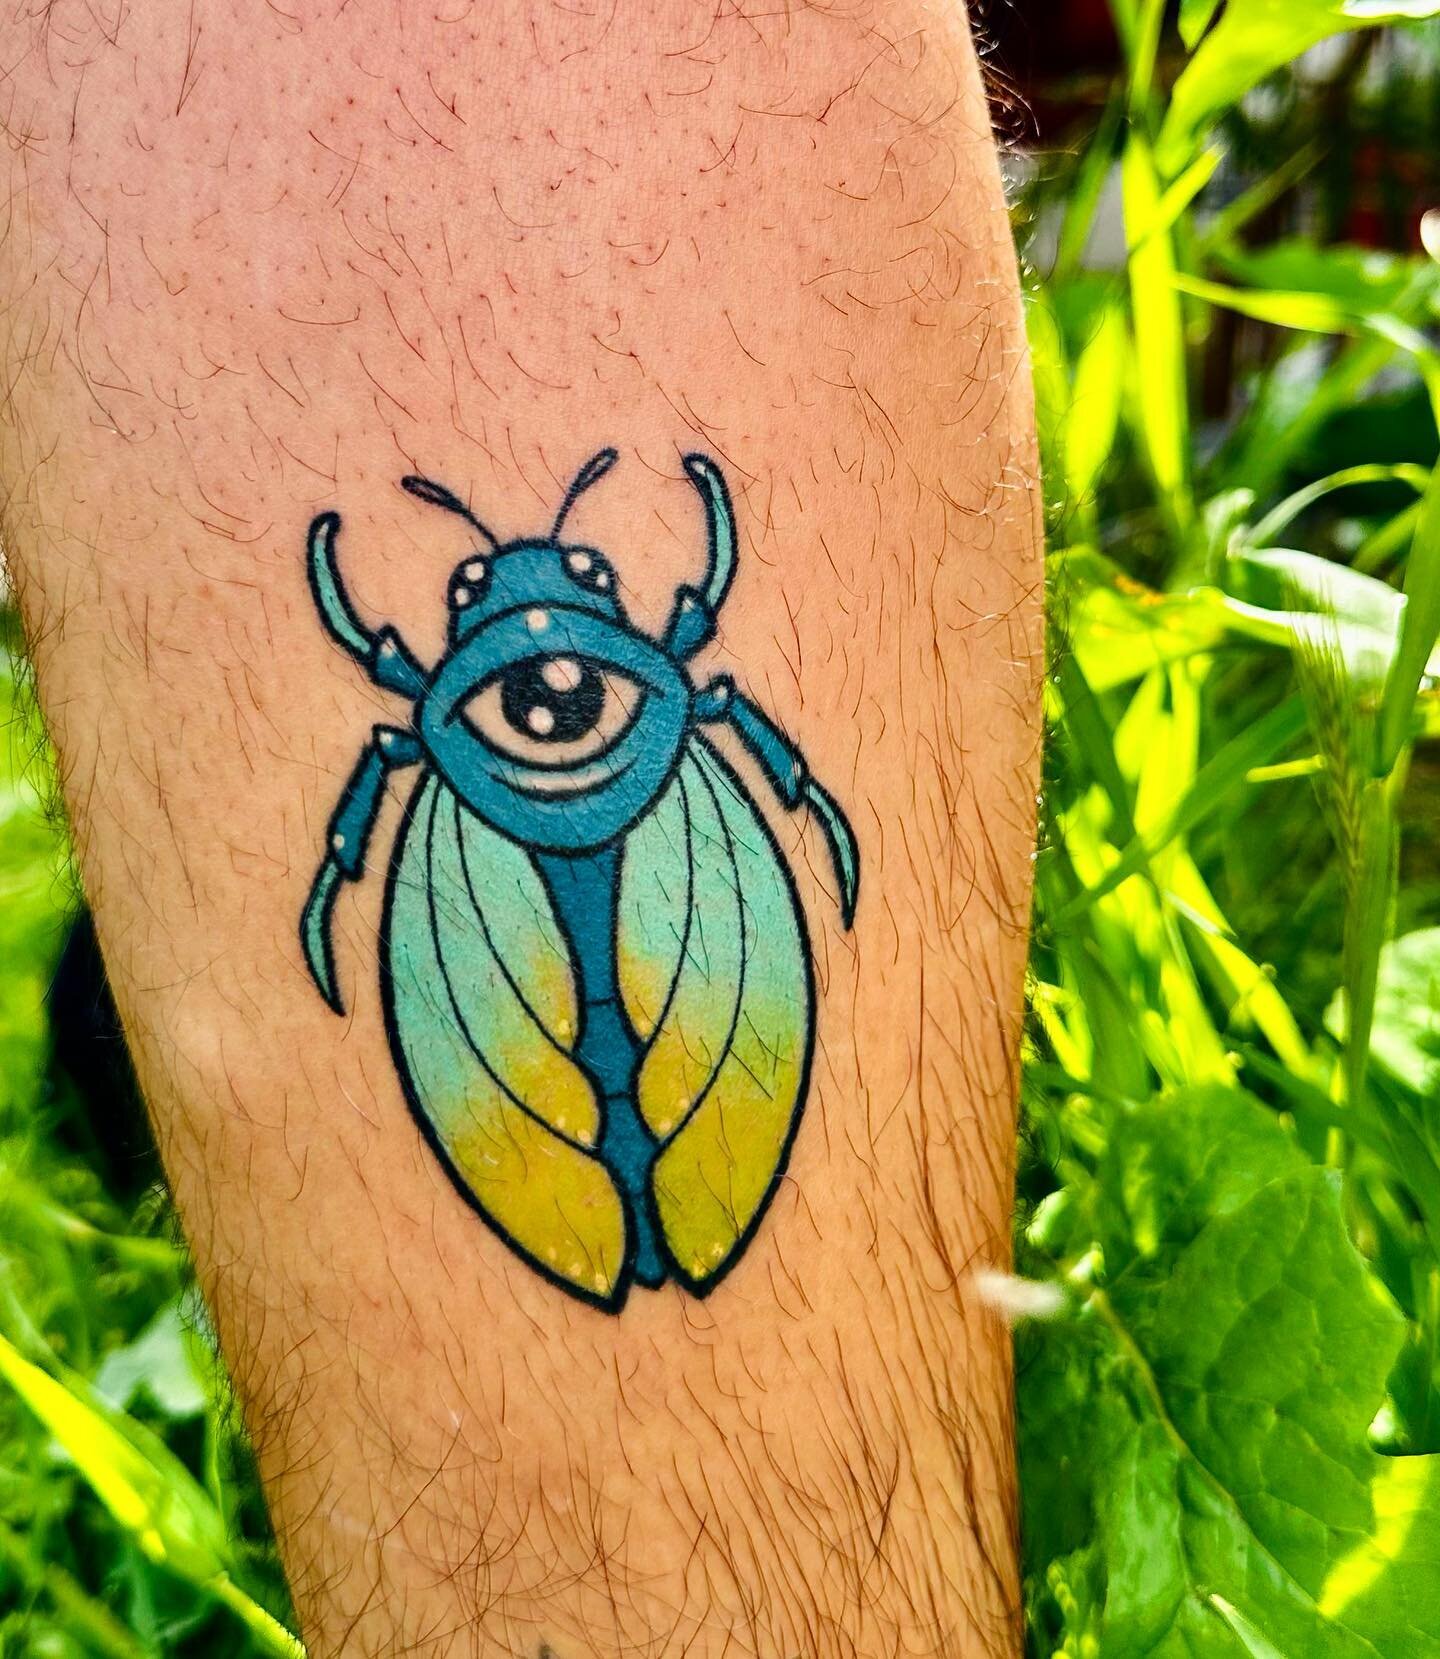 Healed cicada on @gator_homan21 🌿 I did this tattoo on my birthday but somehow managed to not get any fresh photos of it😆 but I love how these ones turned out! 
.
.
.
.
.
#bugtattoo #cicadatattoo #colortattoos #bugtattoos #creaturetattoo #tattooapp